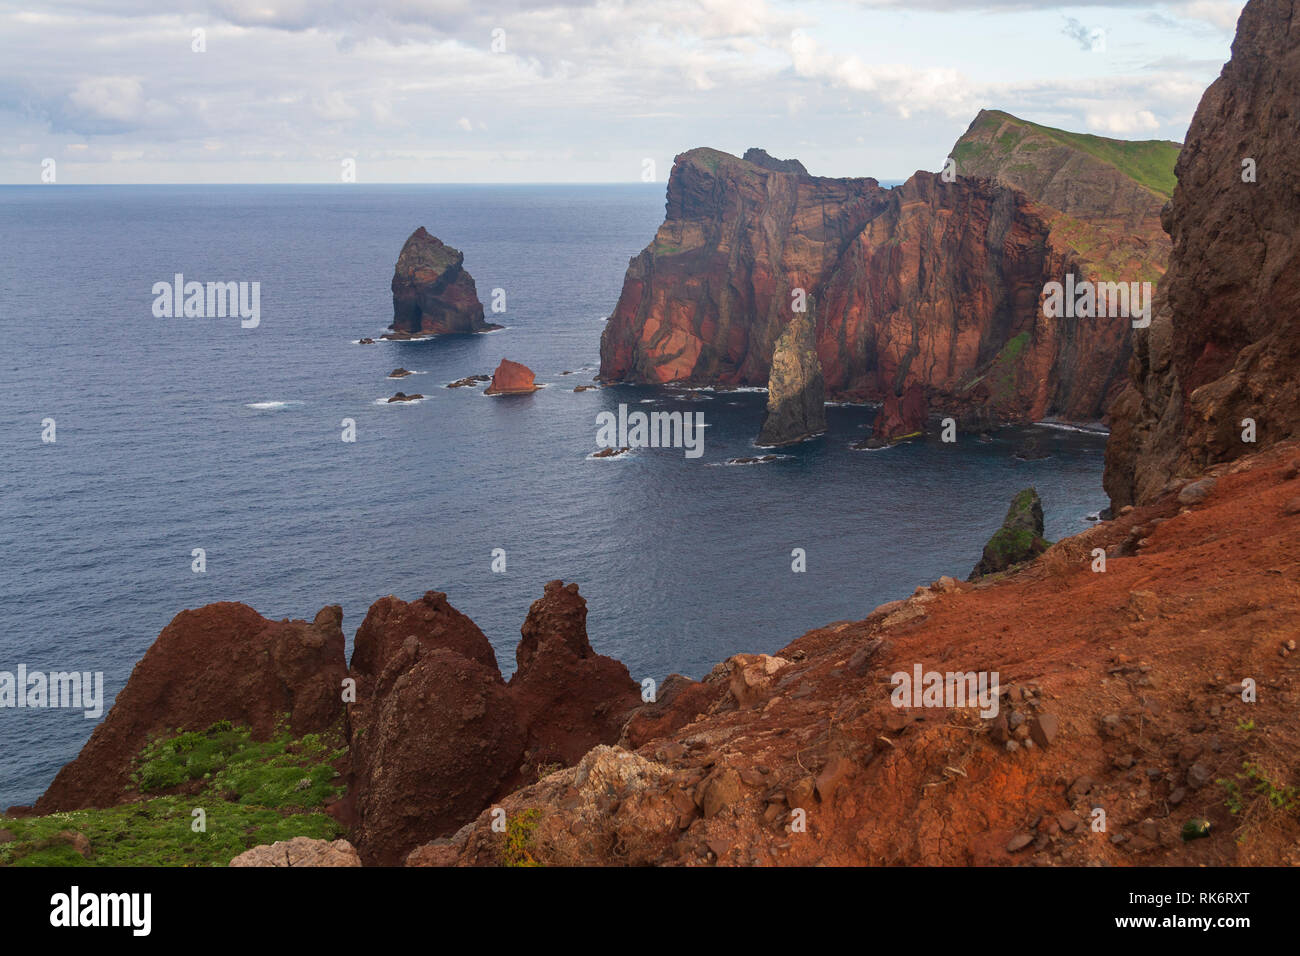 An image of colourful volcanic cliffs taken in Madeira, Portugal Stock Photo